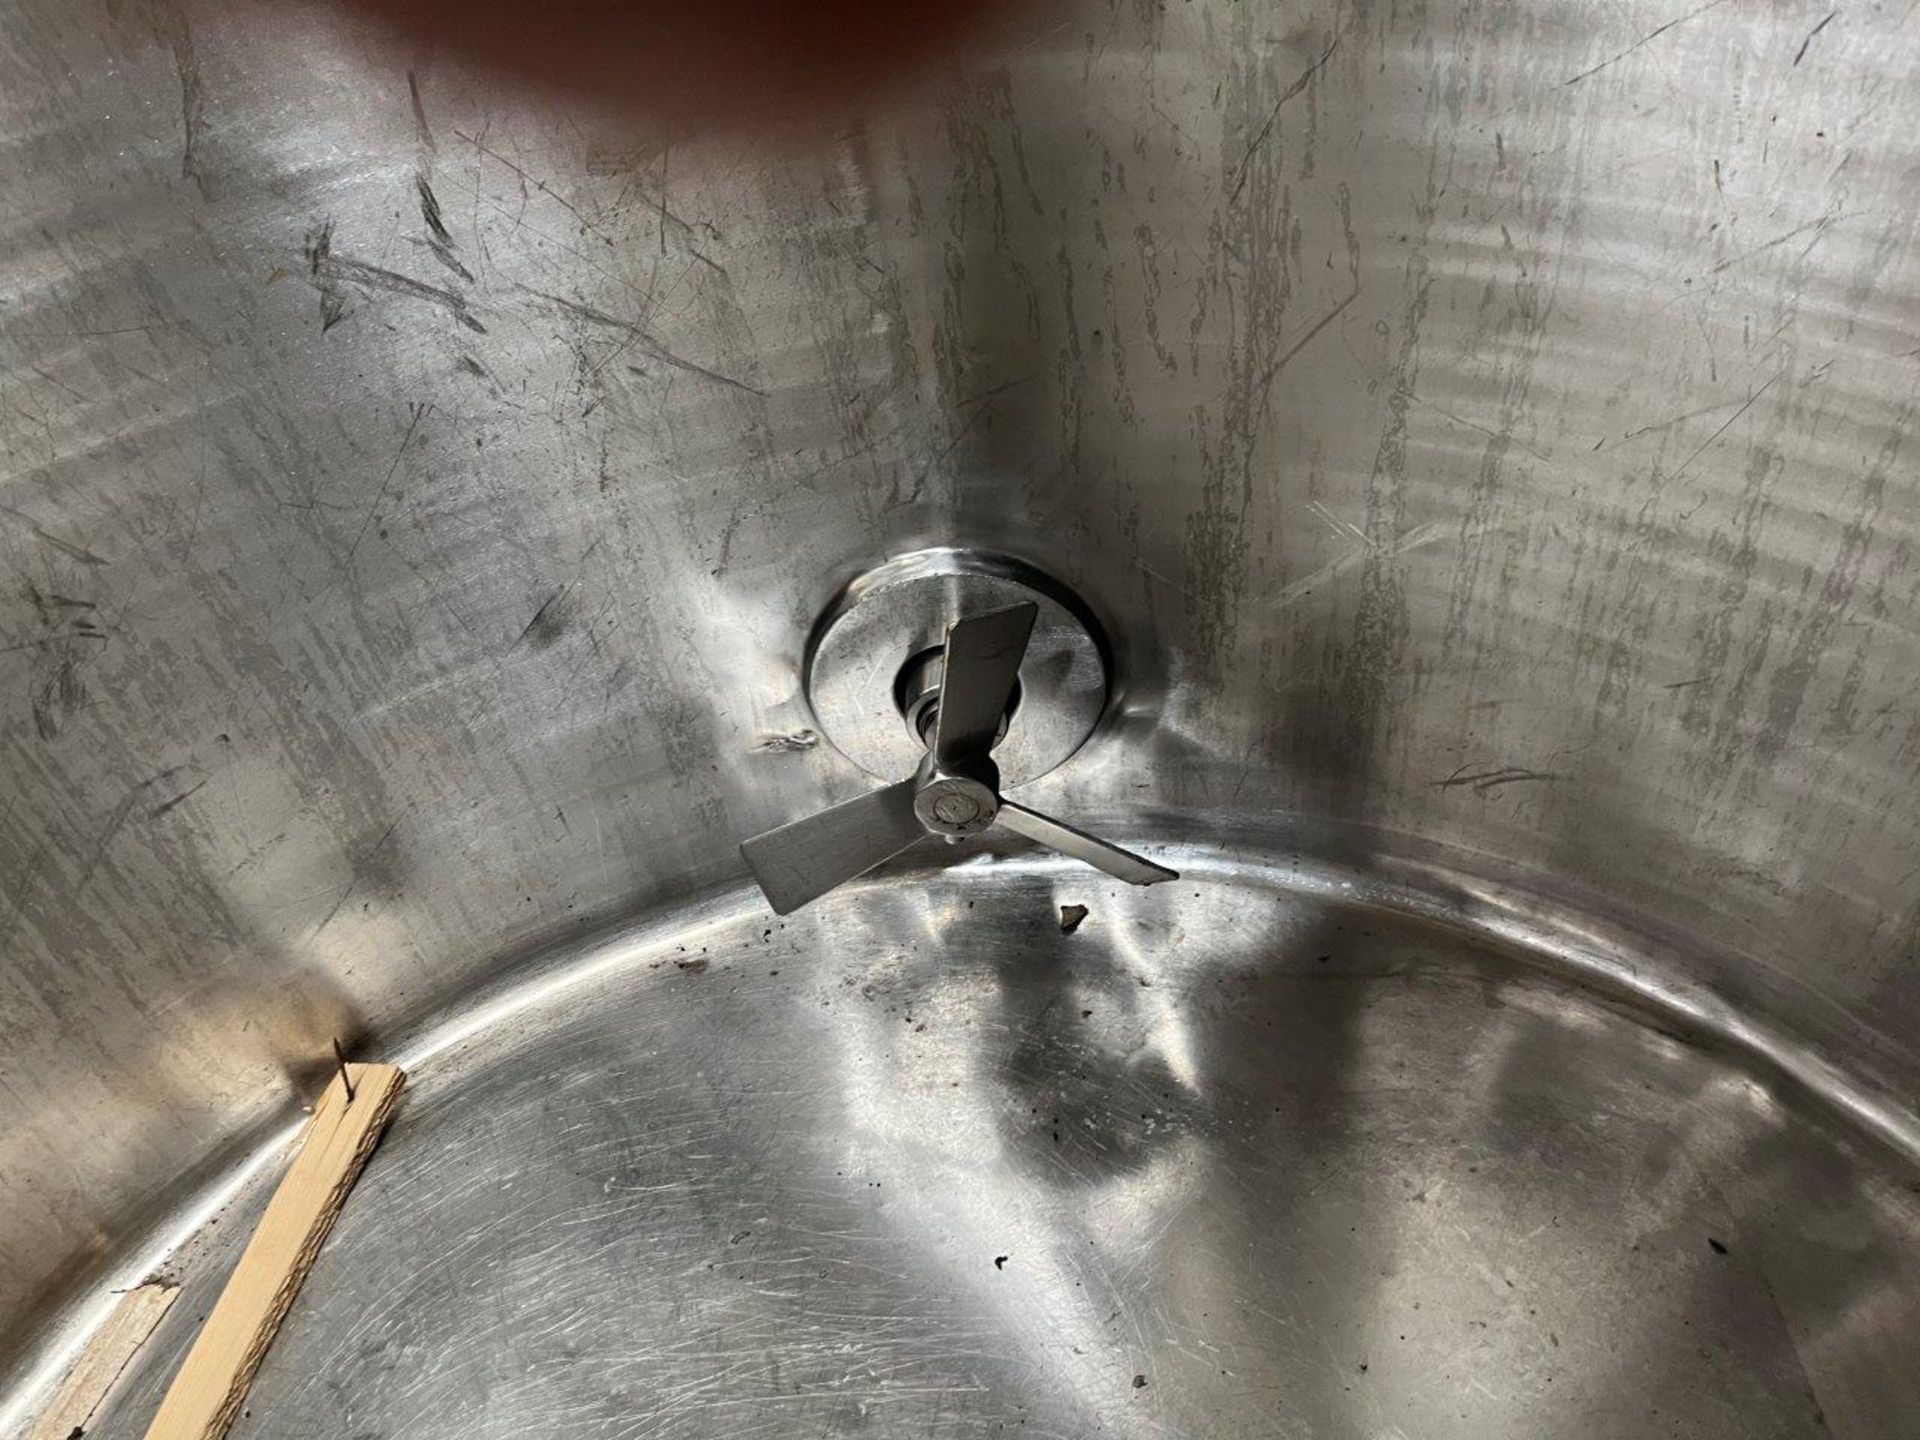 Stainless steel mixing vessel - Image 2 of 2